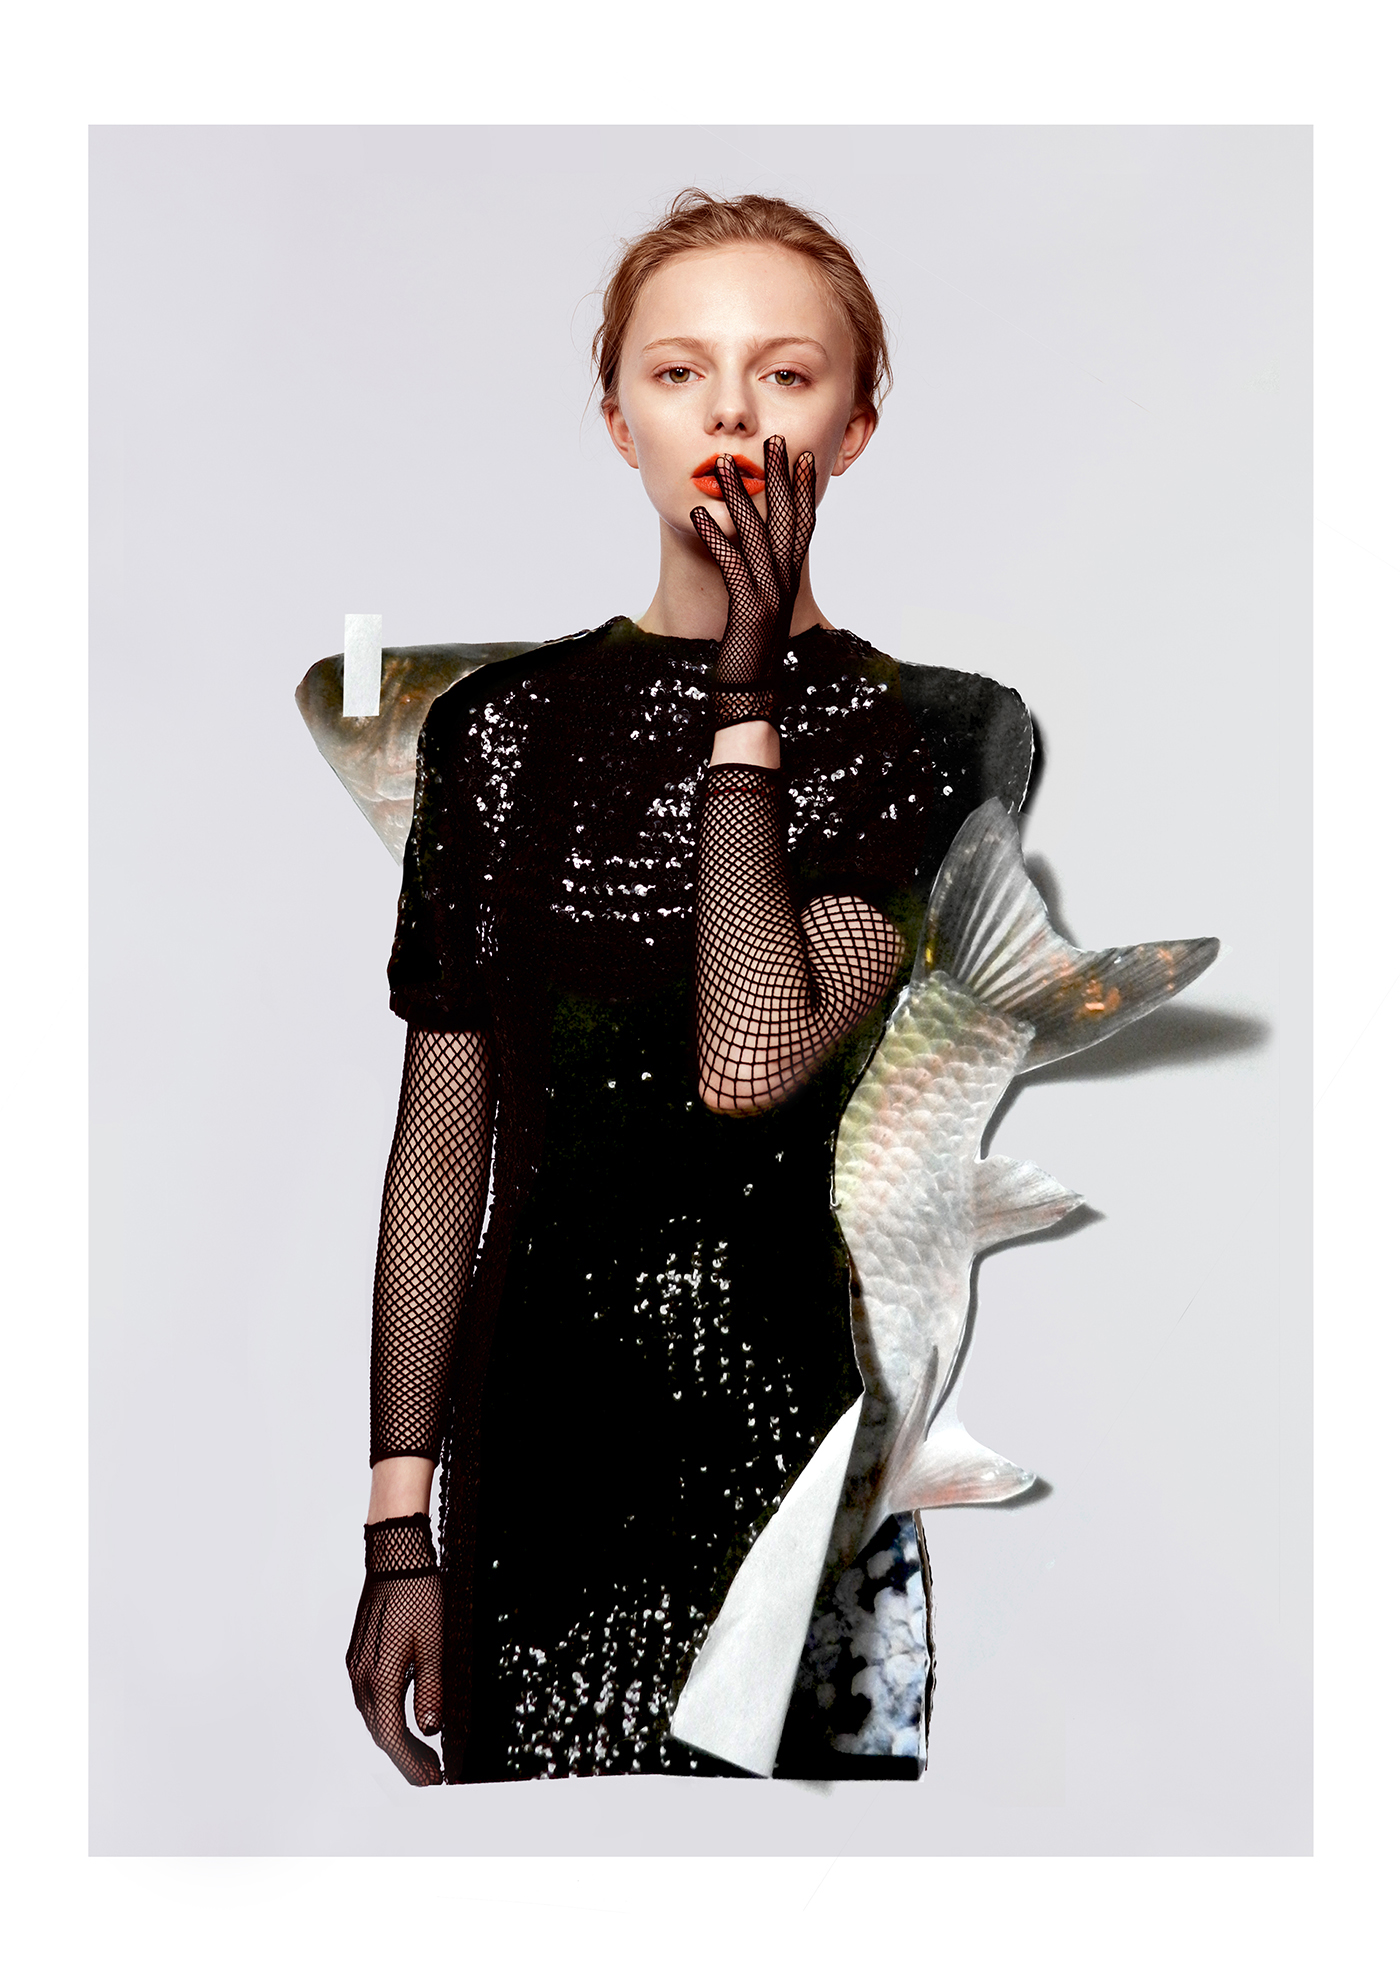 fashion editorial mixed media collage art collage fish editorial